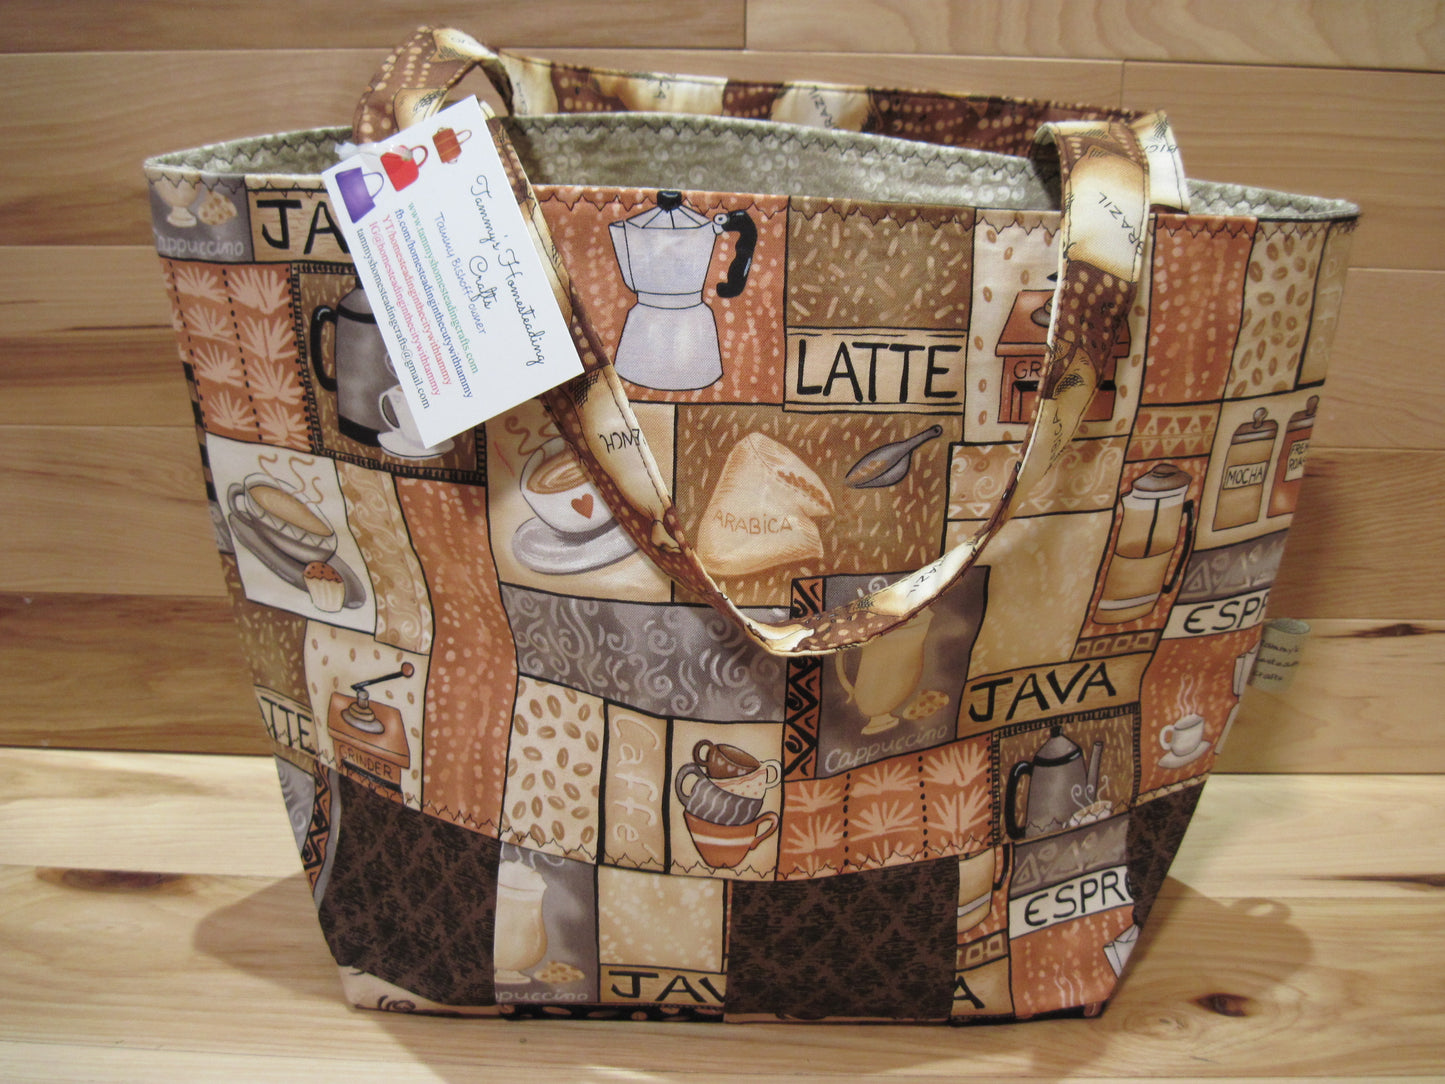 X-Large Tote Style Bag ~ Java, Latte, Espresso w/ quilted bottom & sewn handles